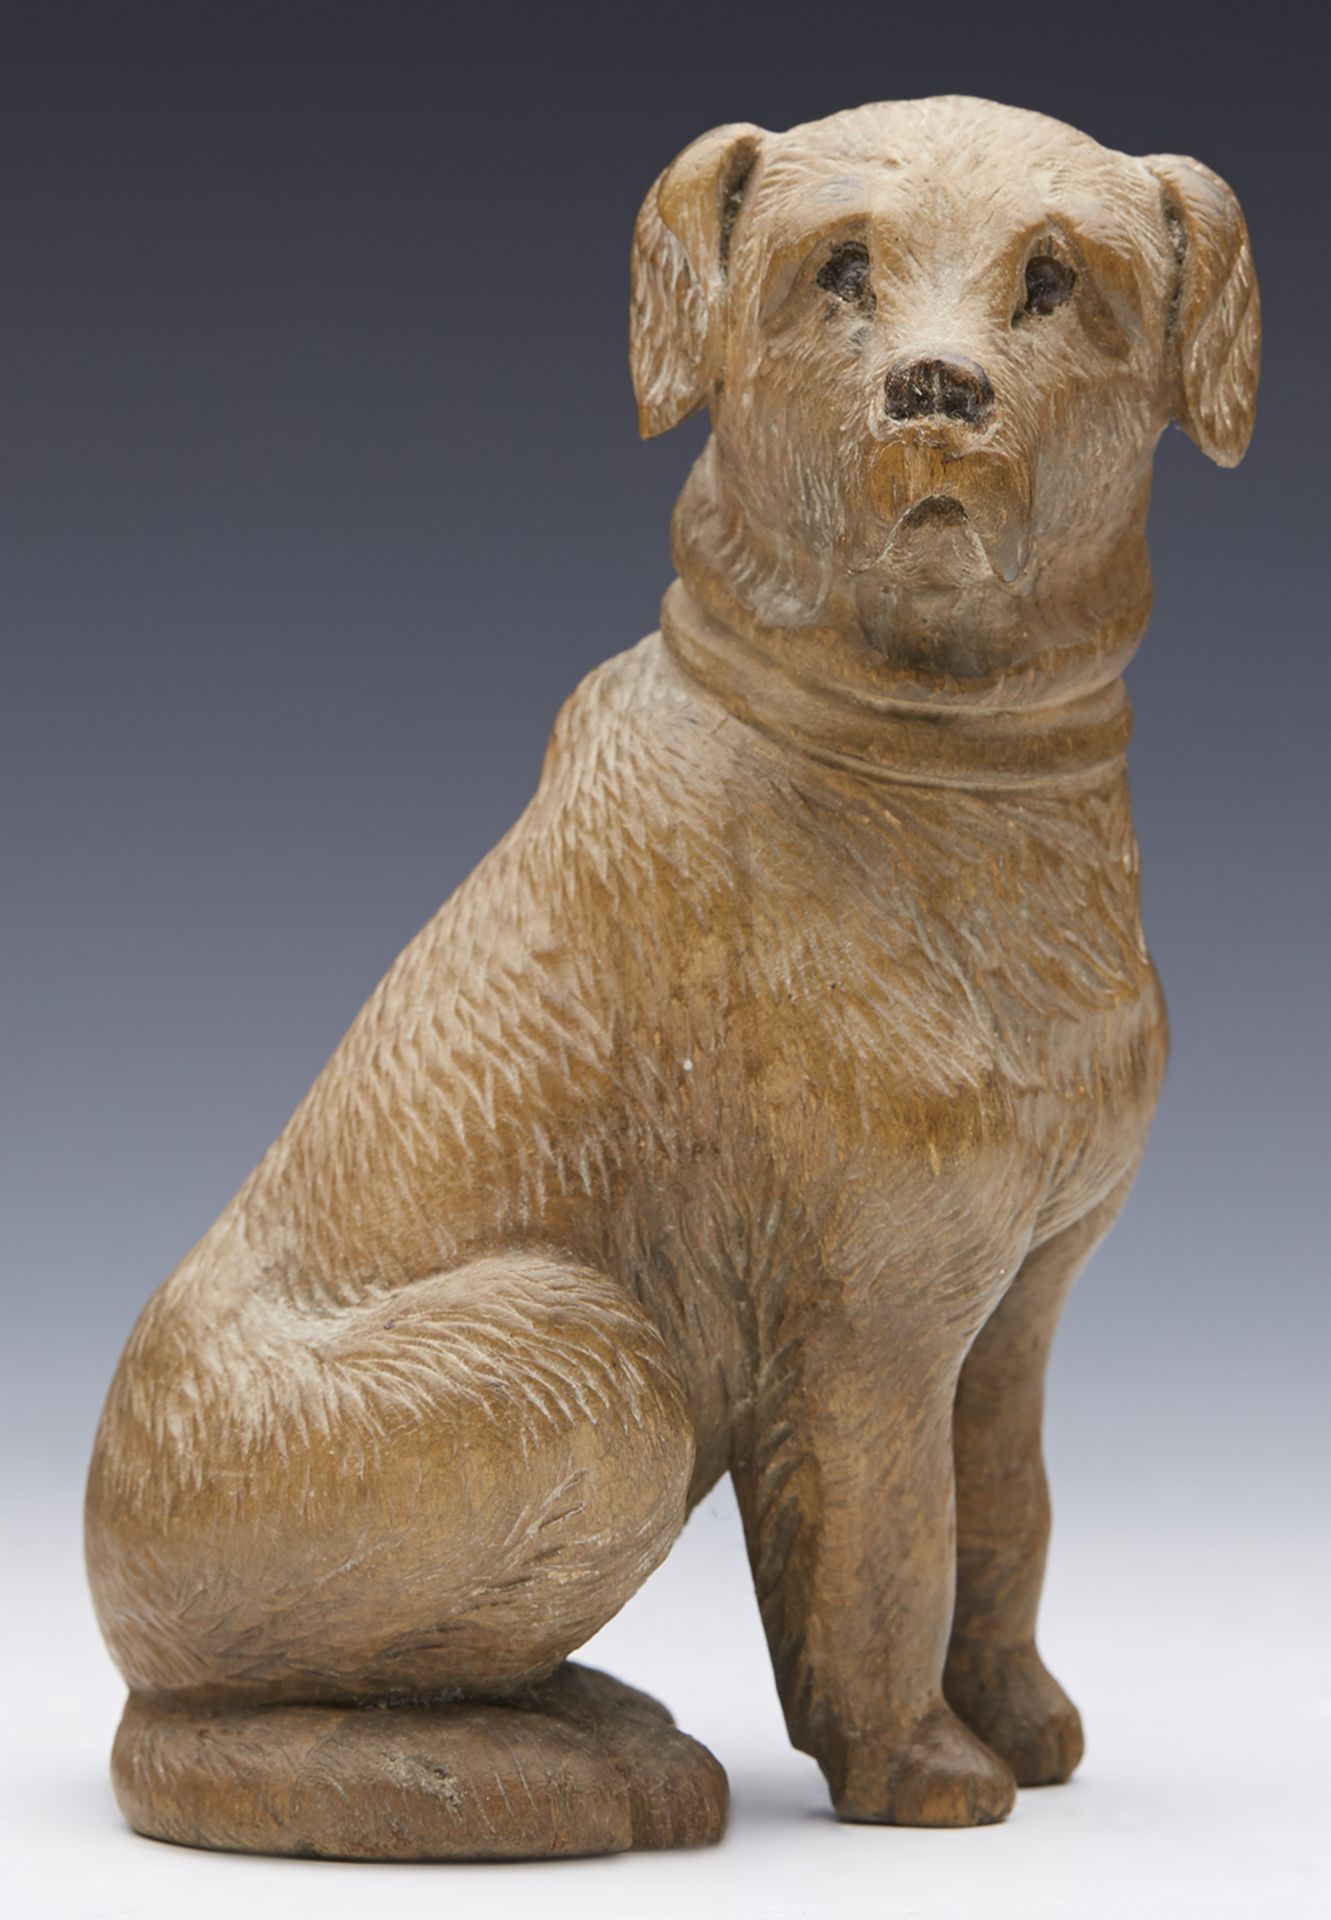 ANTIQUE CARVED BLACKFOREST FIGURE OF A SEATED DOG 19TH C.   DIMENSIONS   Height 10,5cm, Length 7cm